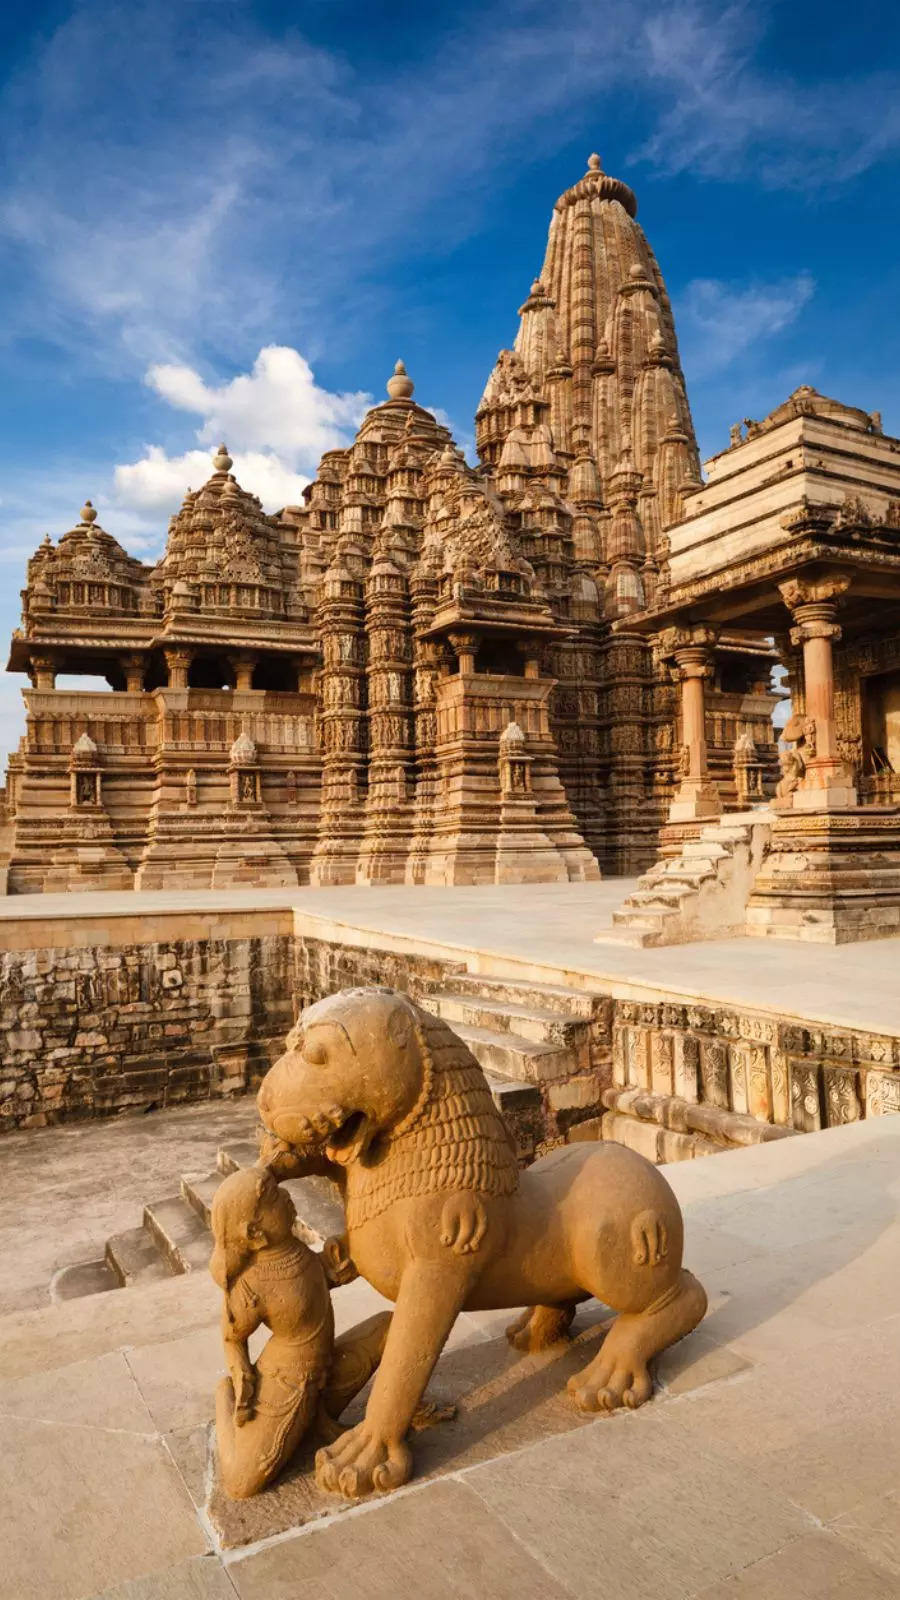 Famous for its exquisite temples adorned with intricate erotic sculptures, Khajuraho in Madhya Pradesh showcases the architectural brilliance of medieval India.